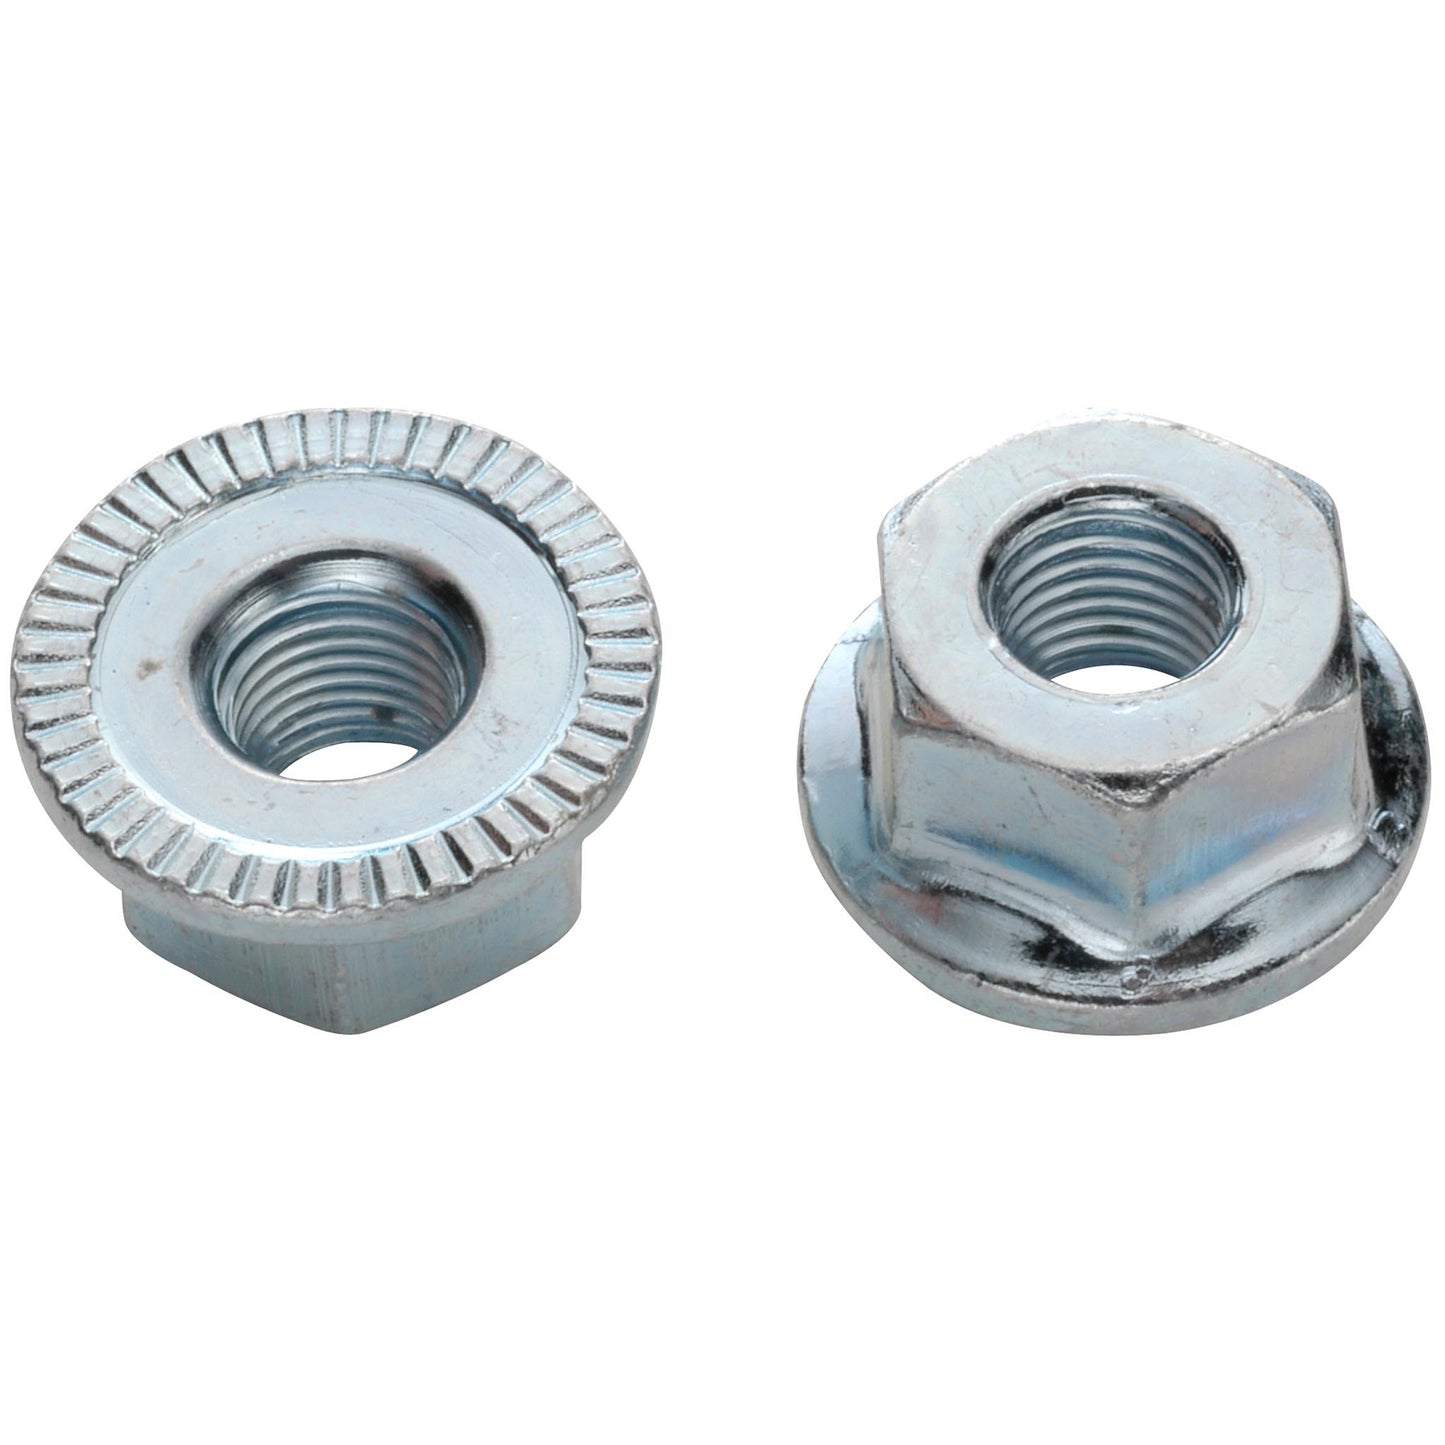 Flange nuts for circuits M 10 x 1, galvanized steel